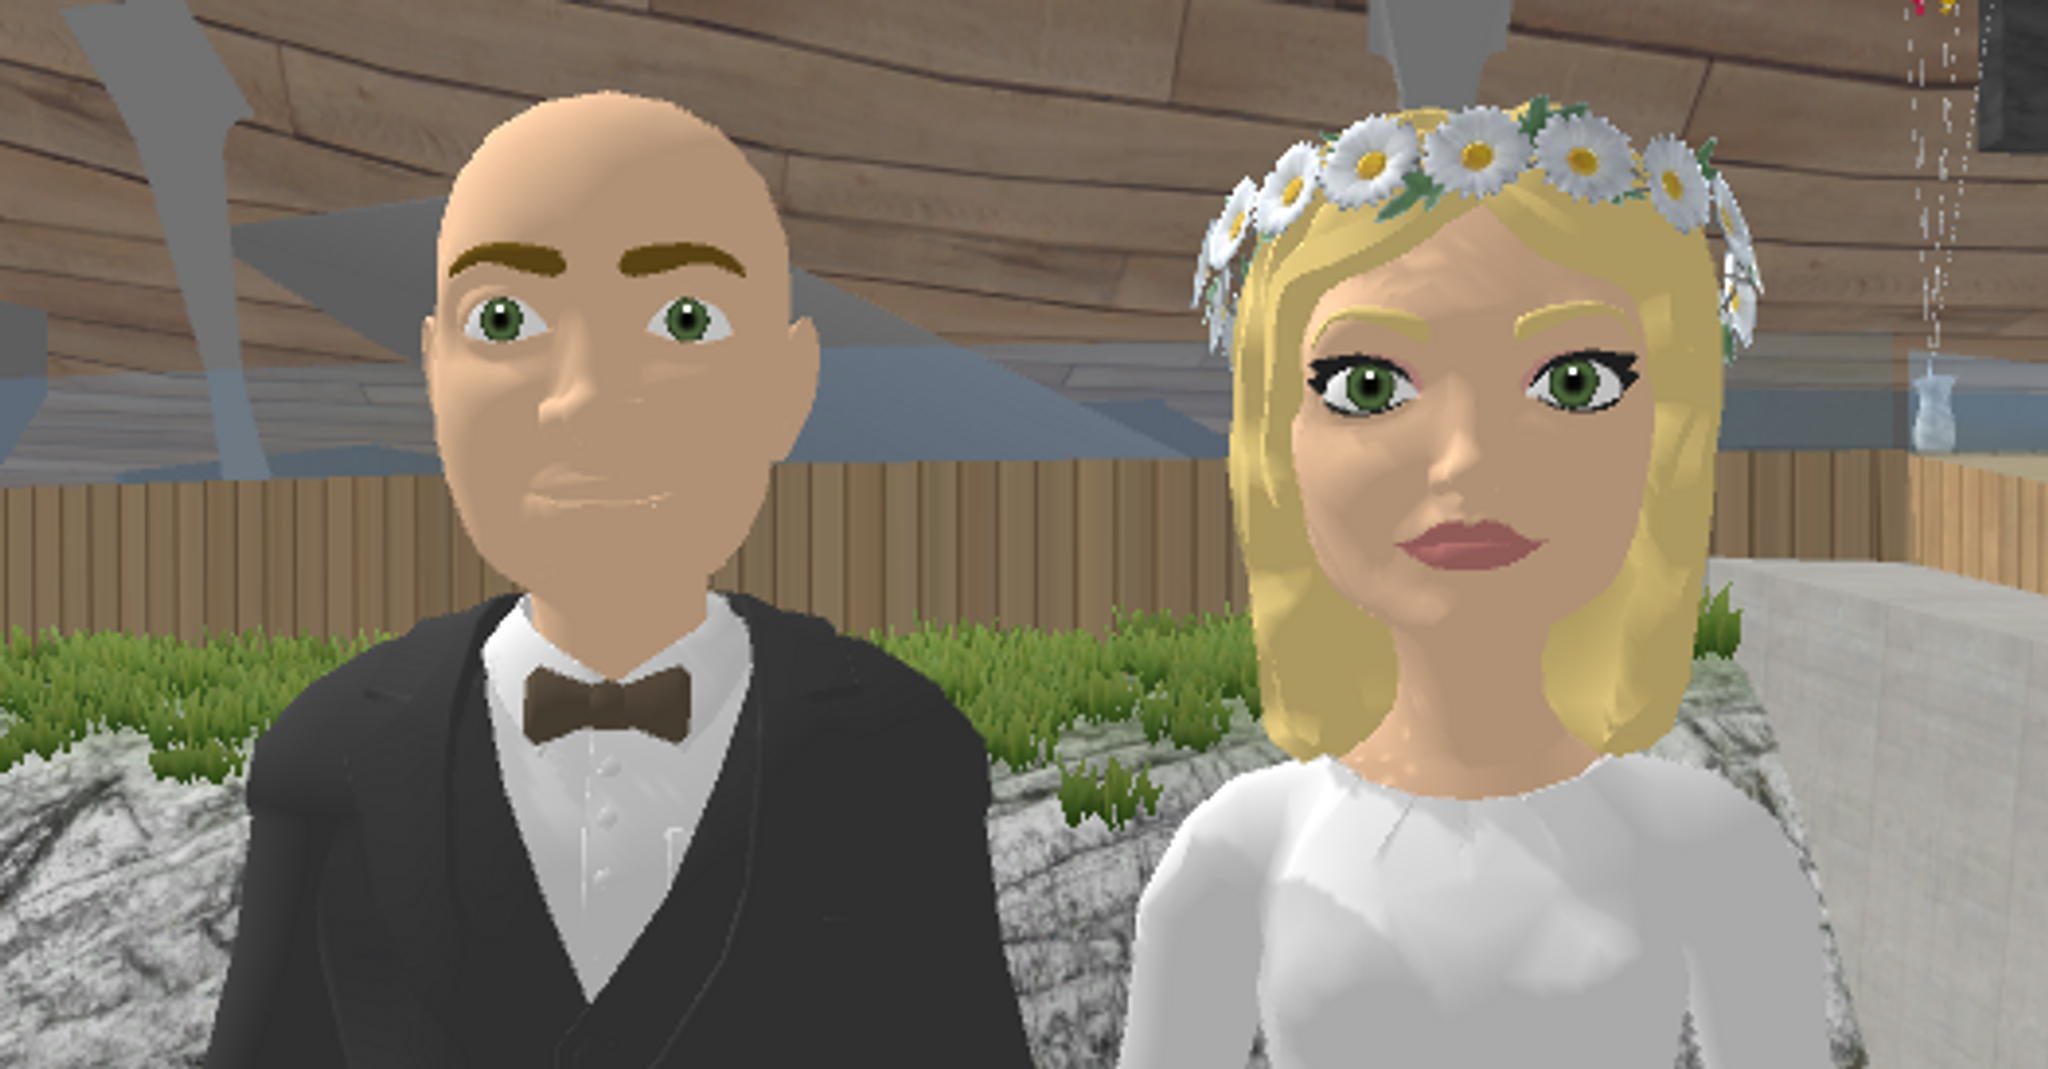 Metaverse wedding signals appetite for phygital events